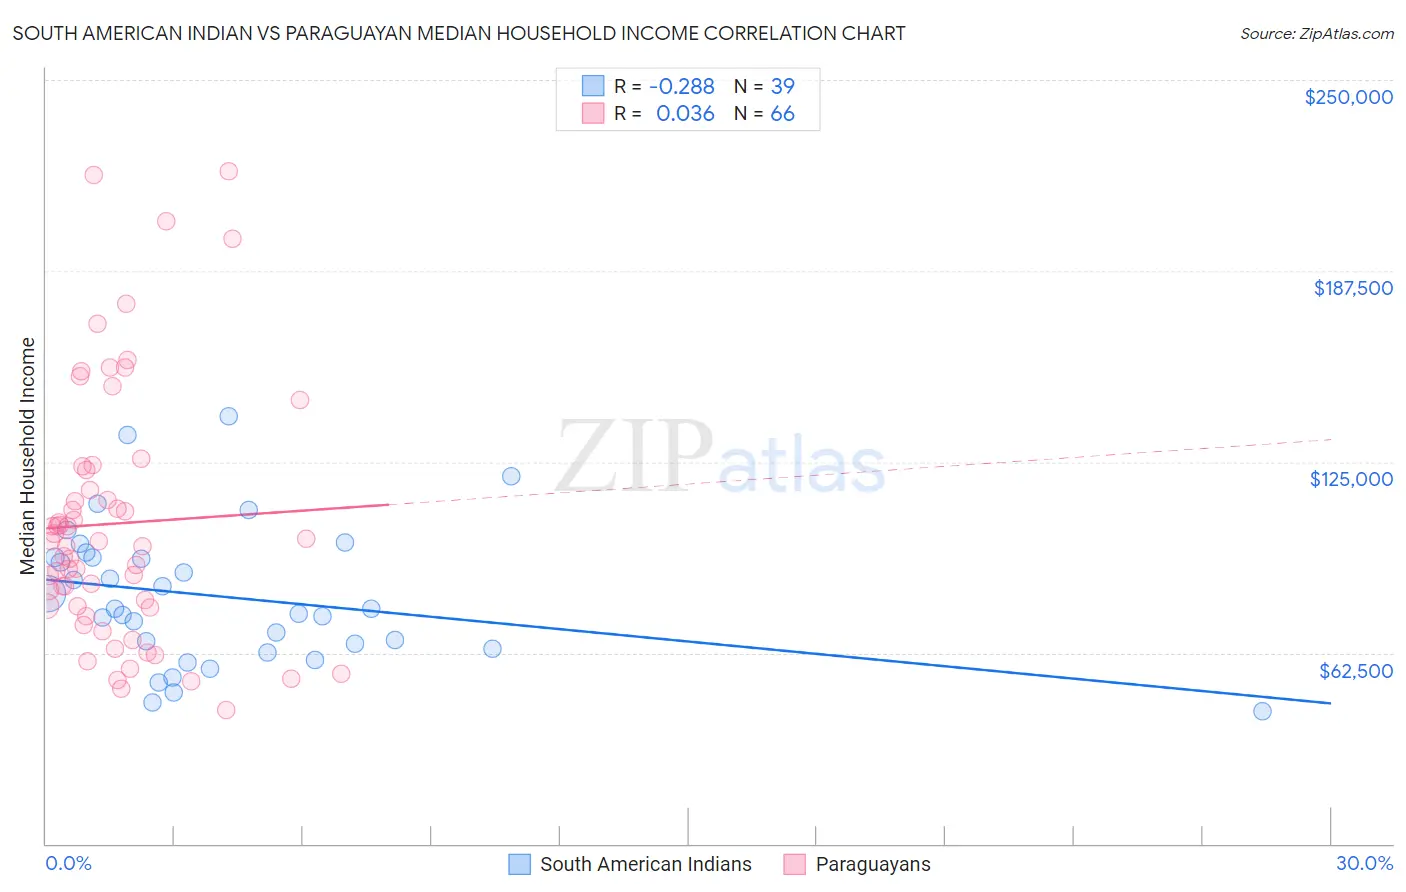 South American Indian vs Paraguayan Median Household Income